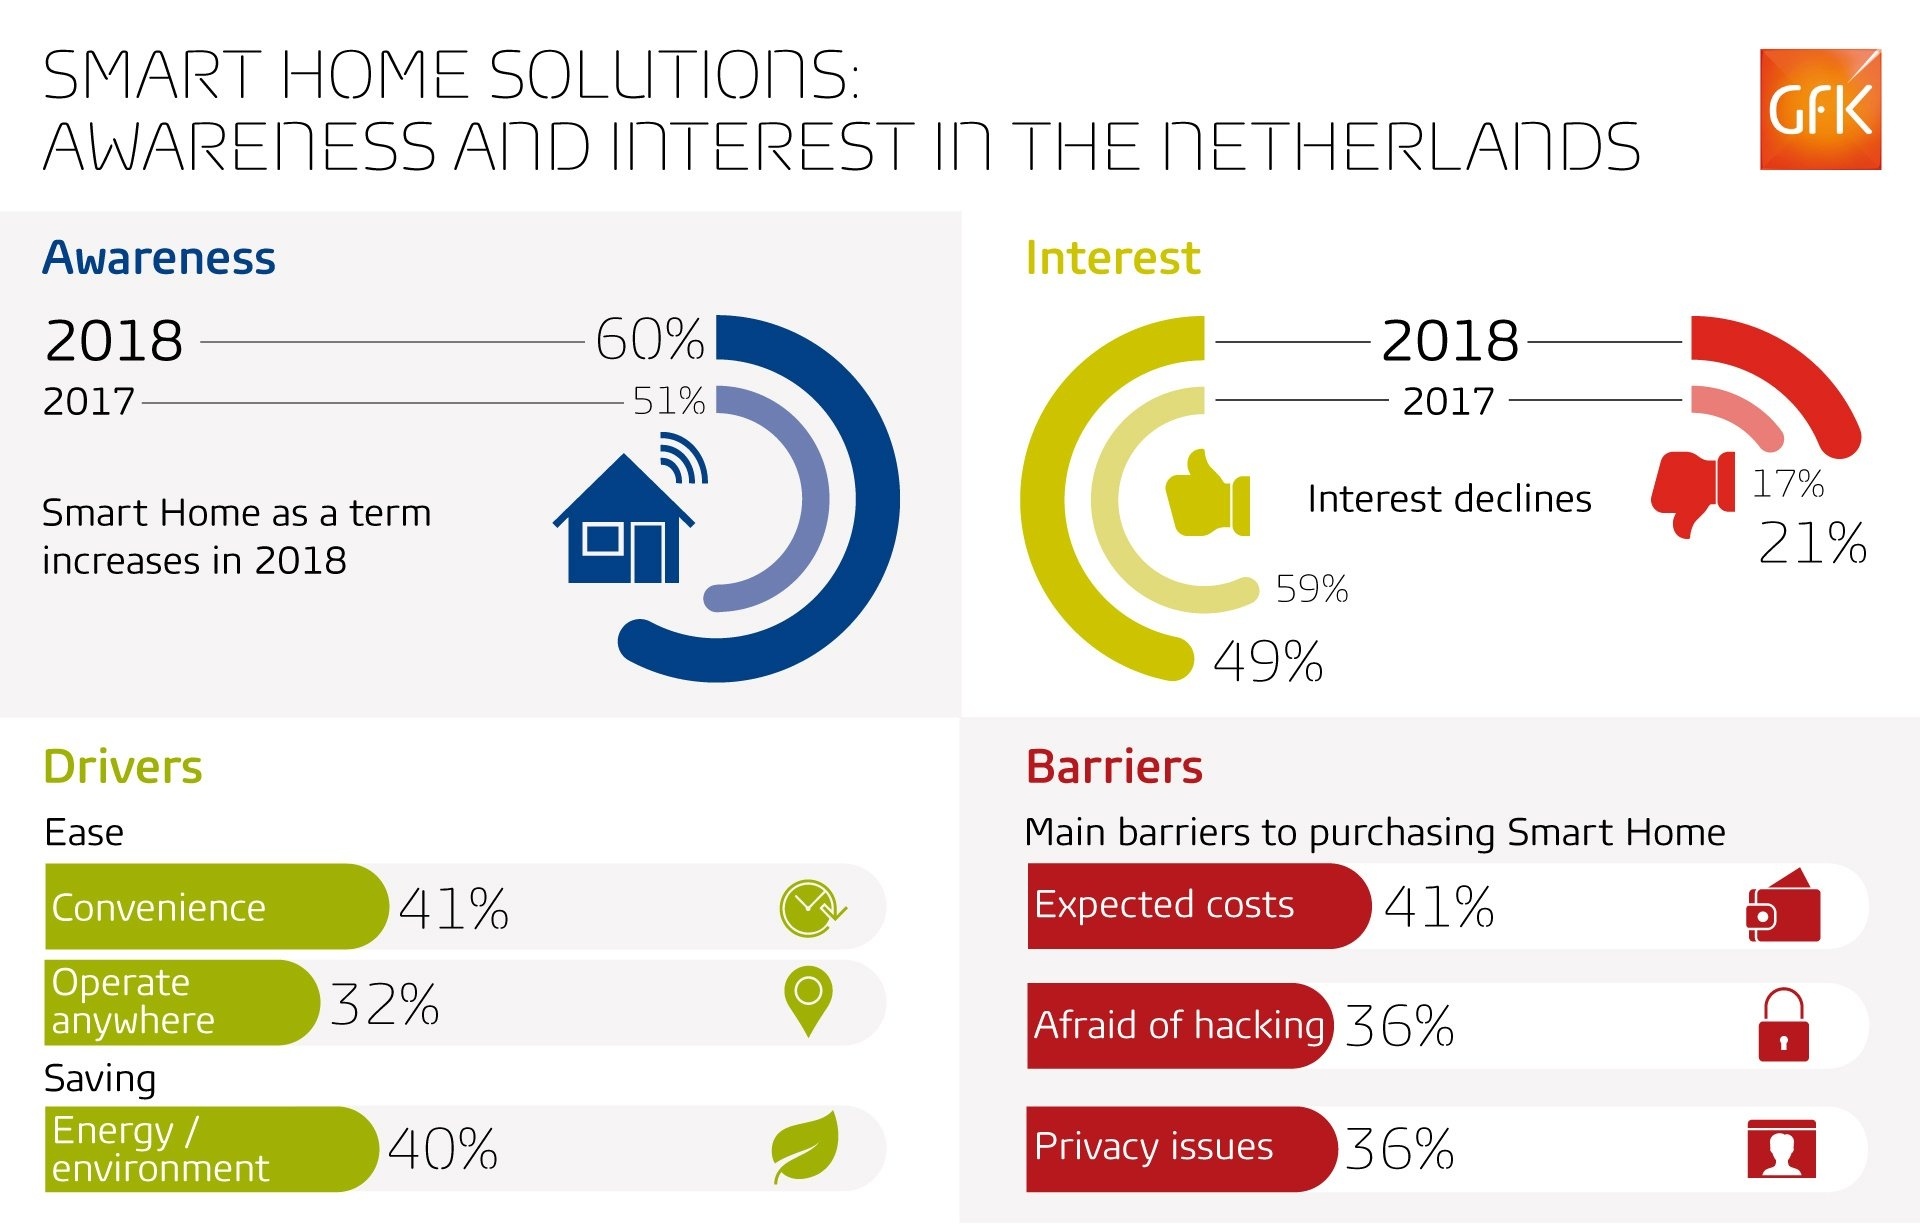 GfK_Smart_home_report_2018_Insights_barriers_fears-511830-edited